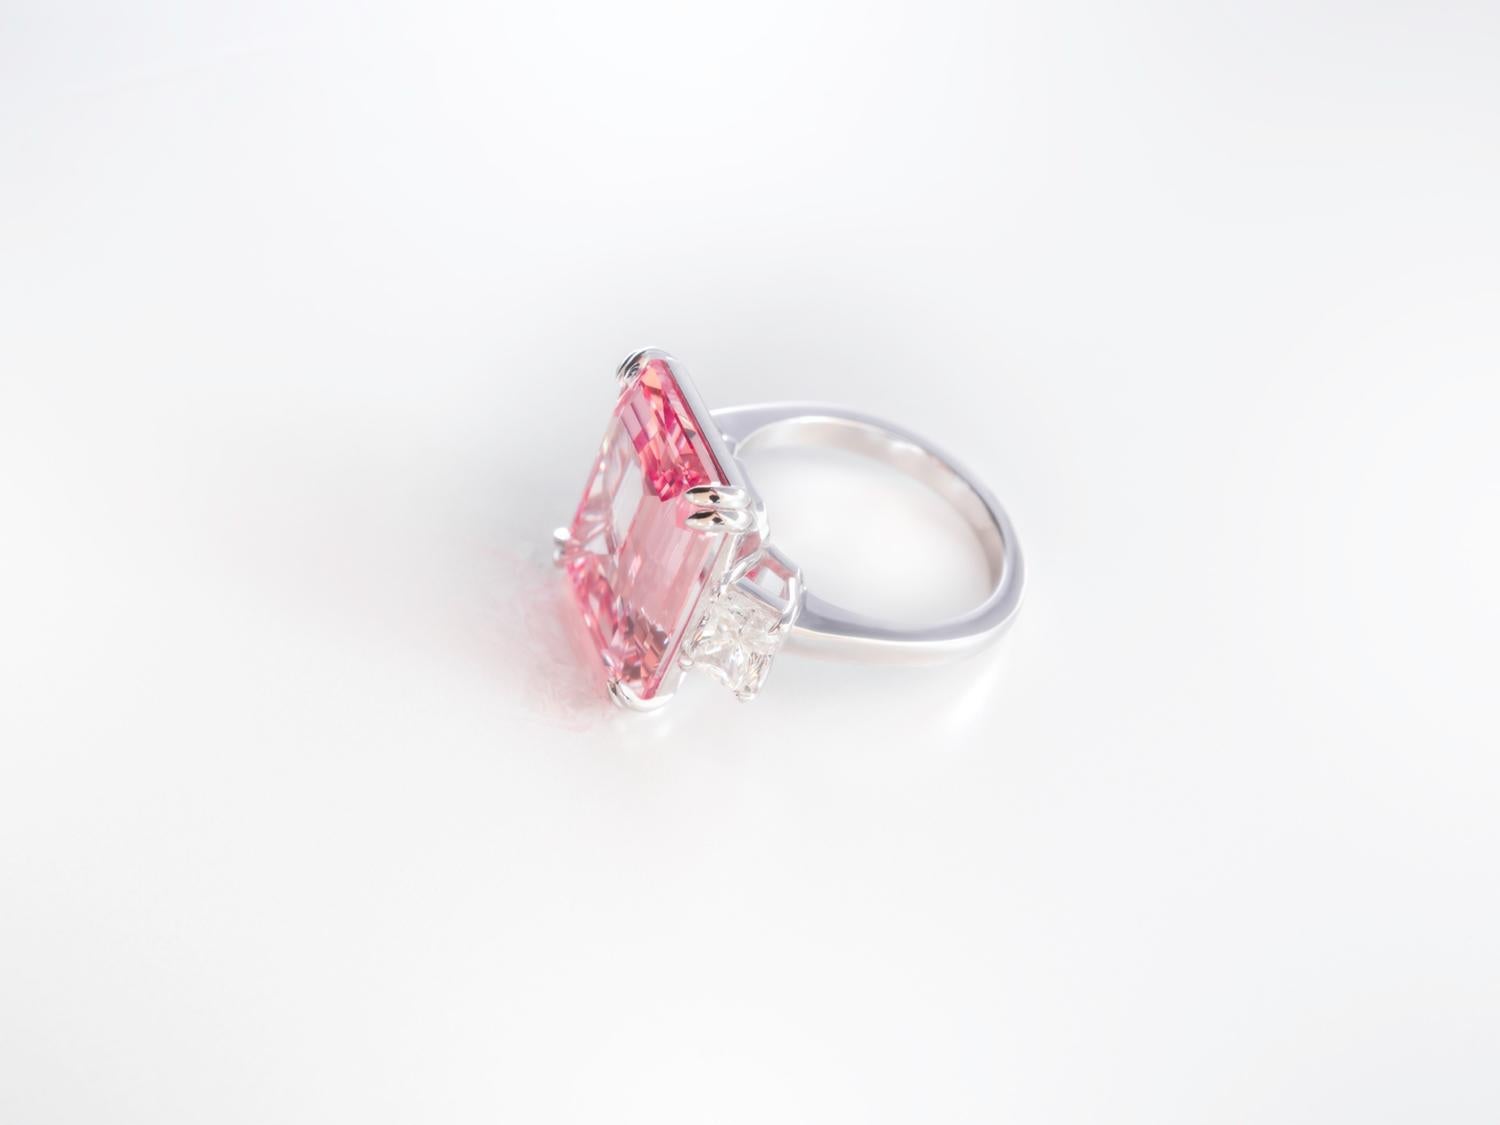 Modern 12 Carat Fancy Intense Pink Diamond Cocktail Ring with Emerald Cut GIA For Sale